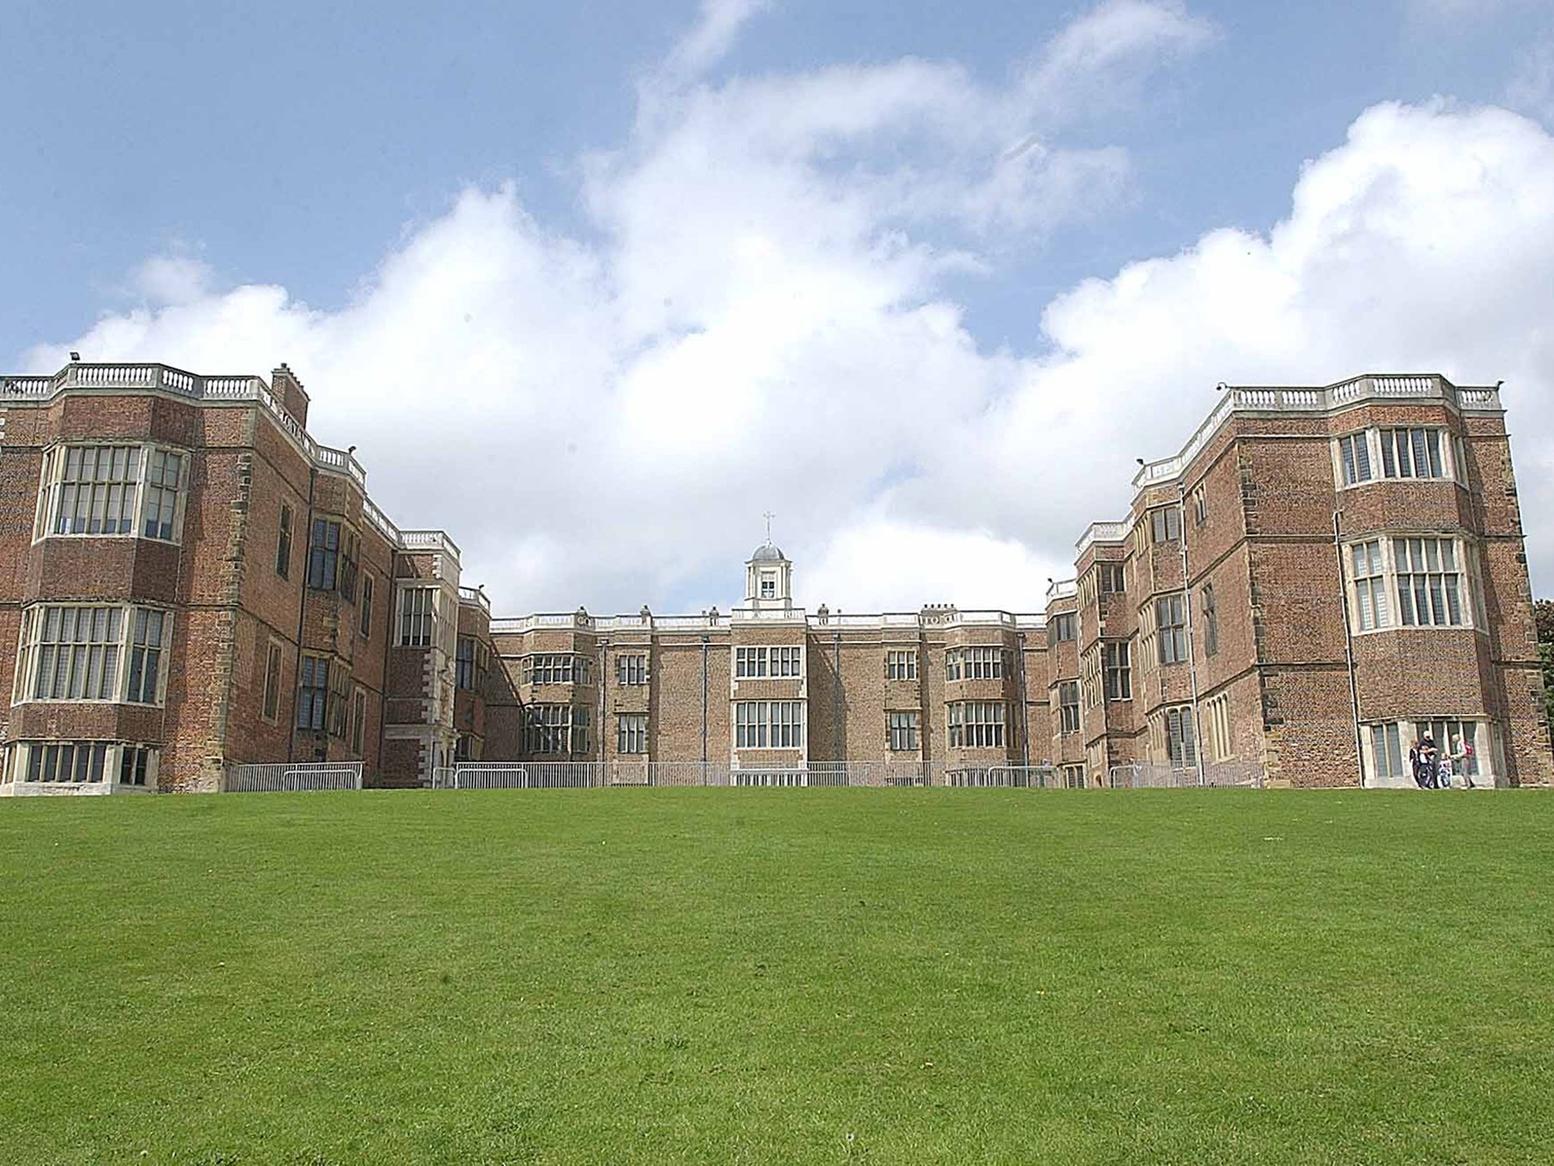 House prices have dropped by 5 per cent in Temple Newsam since 2007